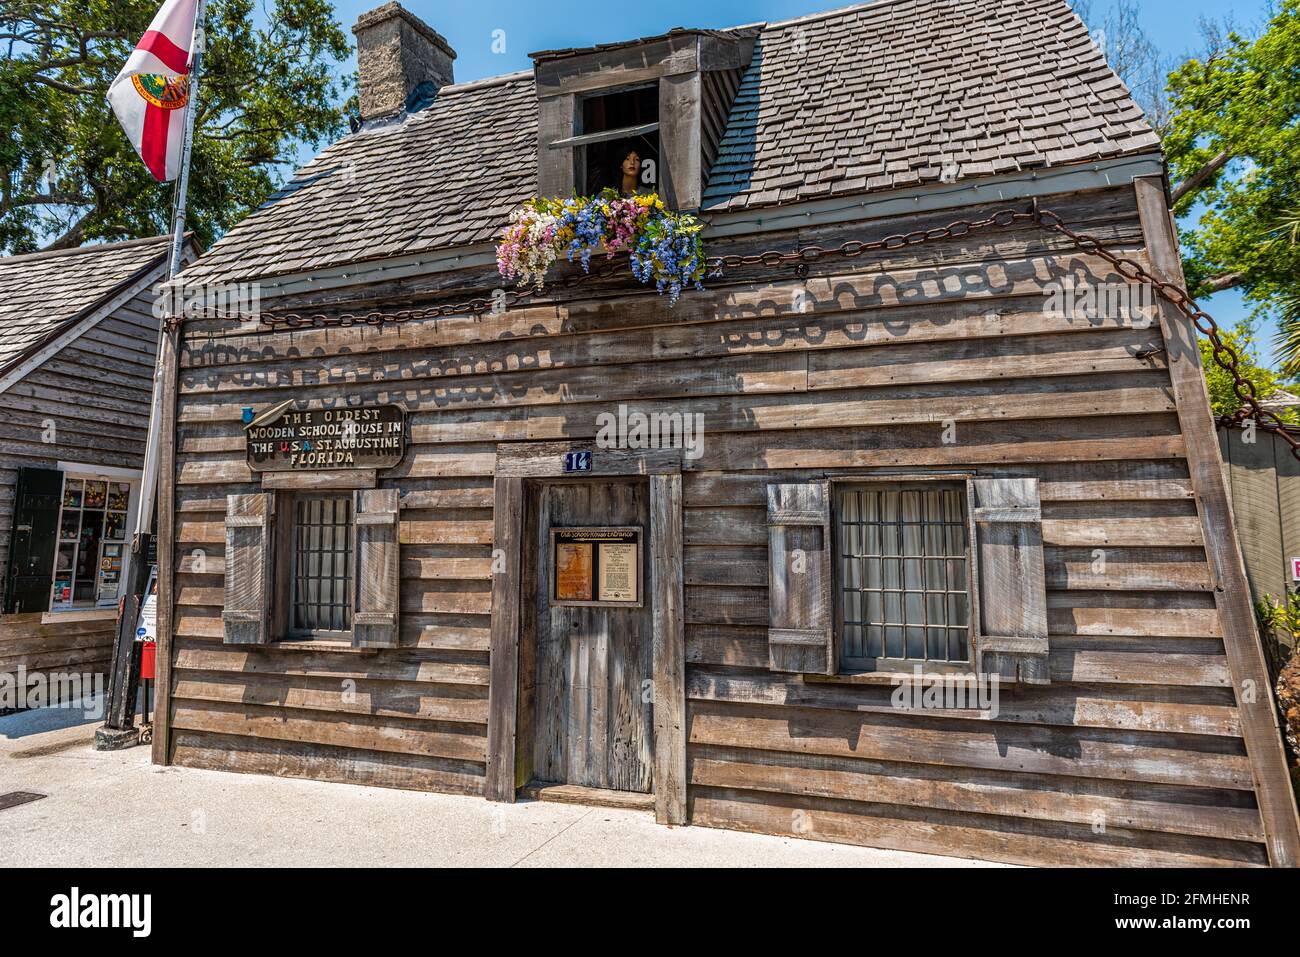 St. Augustine, USA - May 10, 2018: Florida old town city with oldest wood school house in Spanish colonial quarter with sign entrance on building Stock Photo